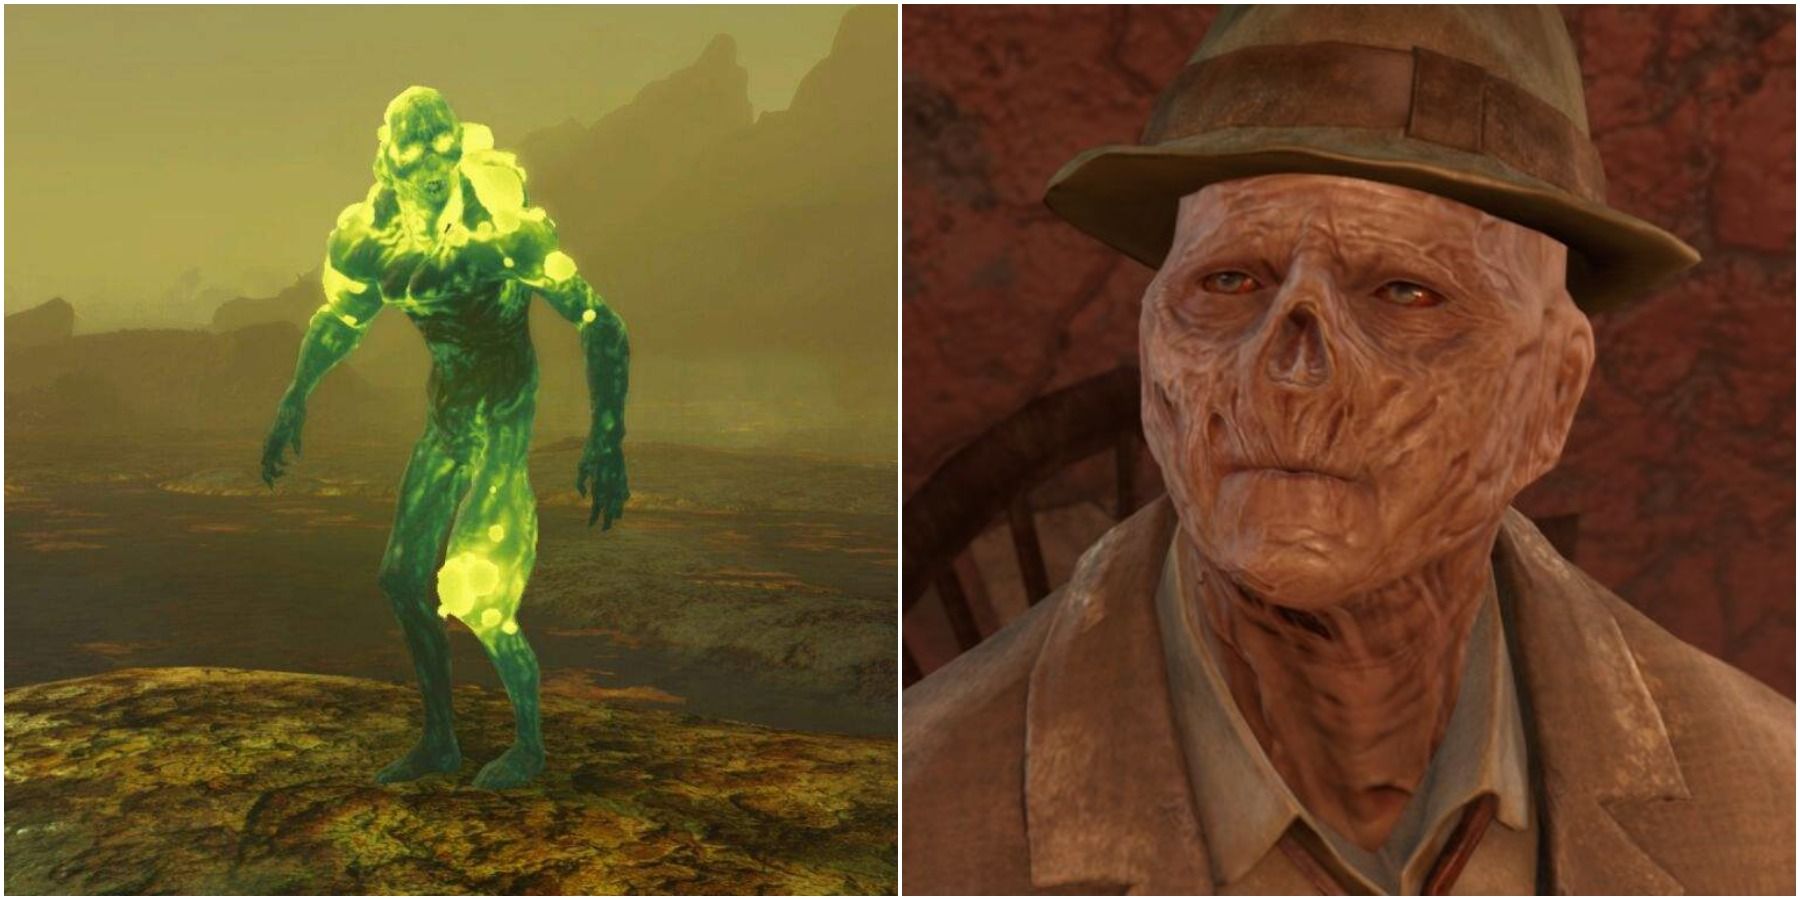 Split image of glowing one and ghoul in Fallout 4.